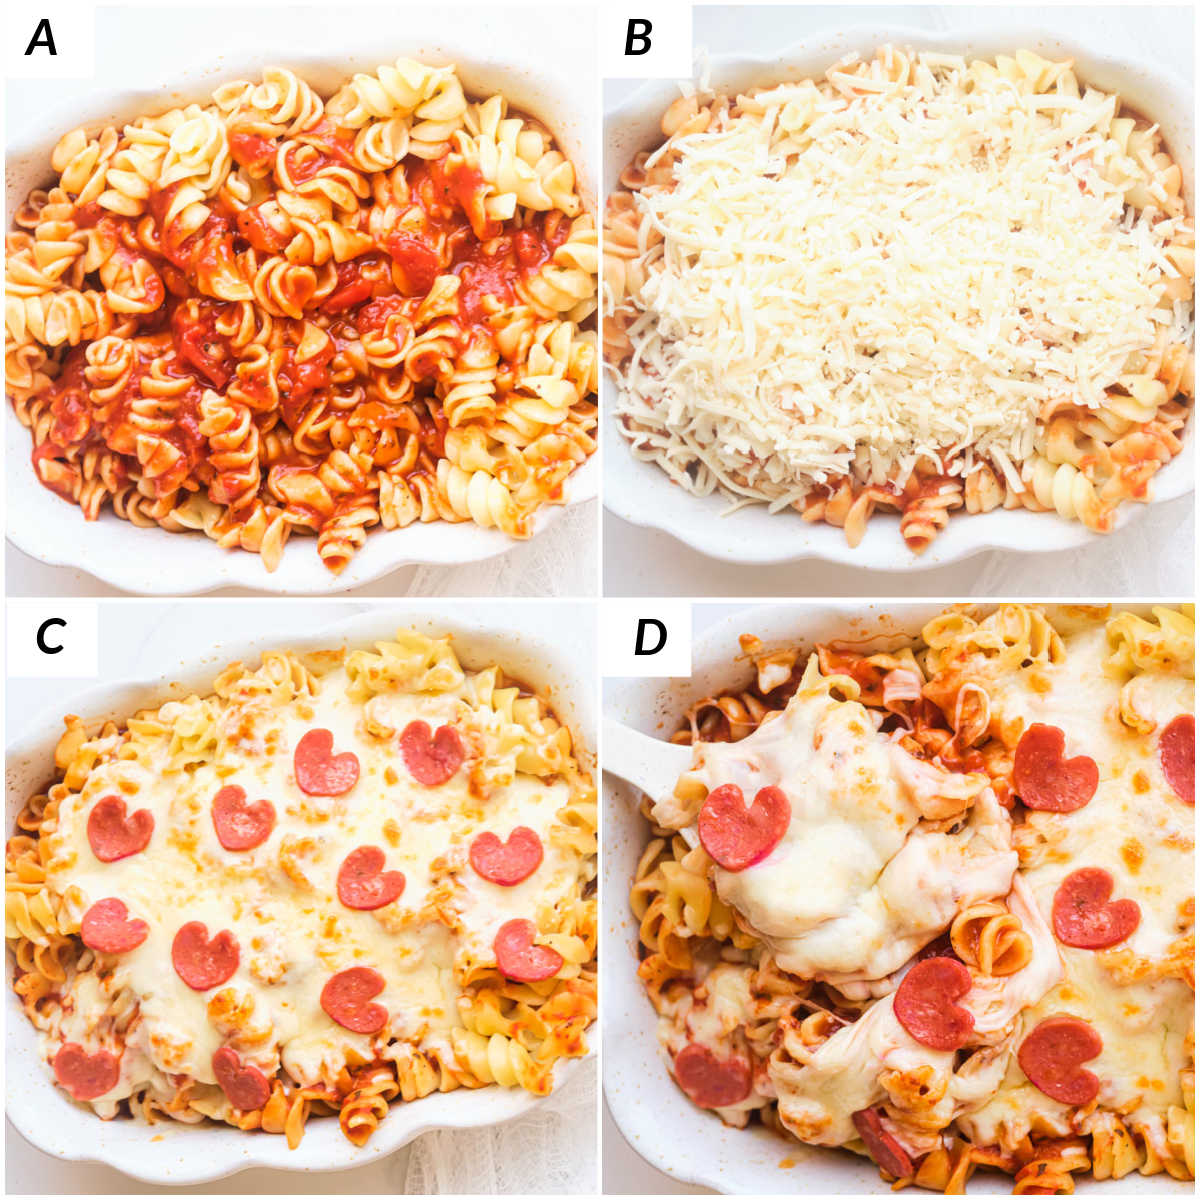 image collage showing the steps for making air fryer pizza casserole